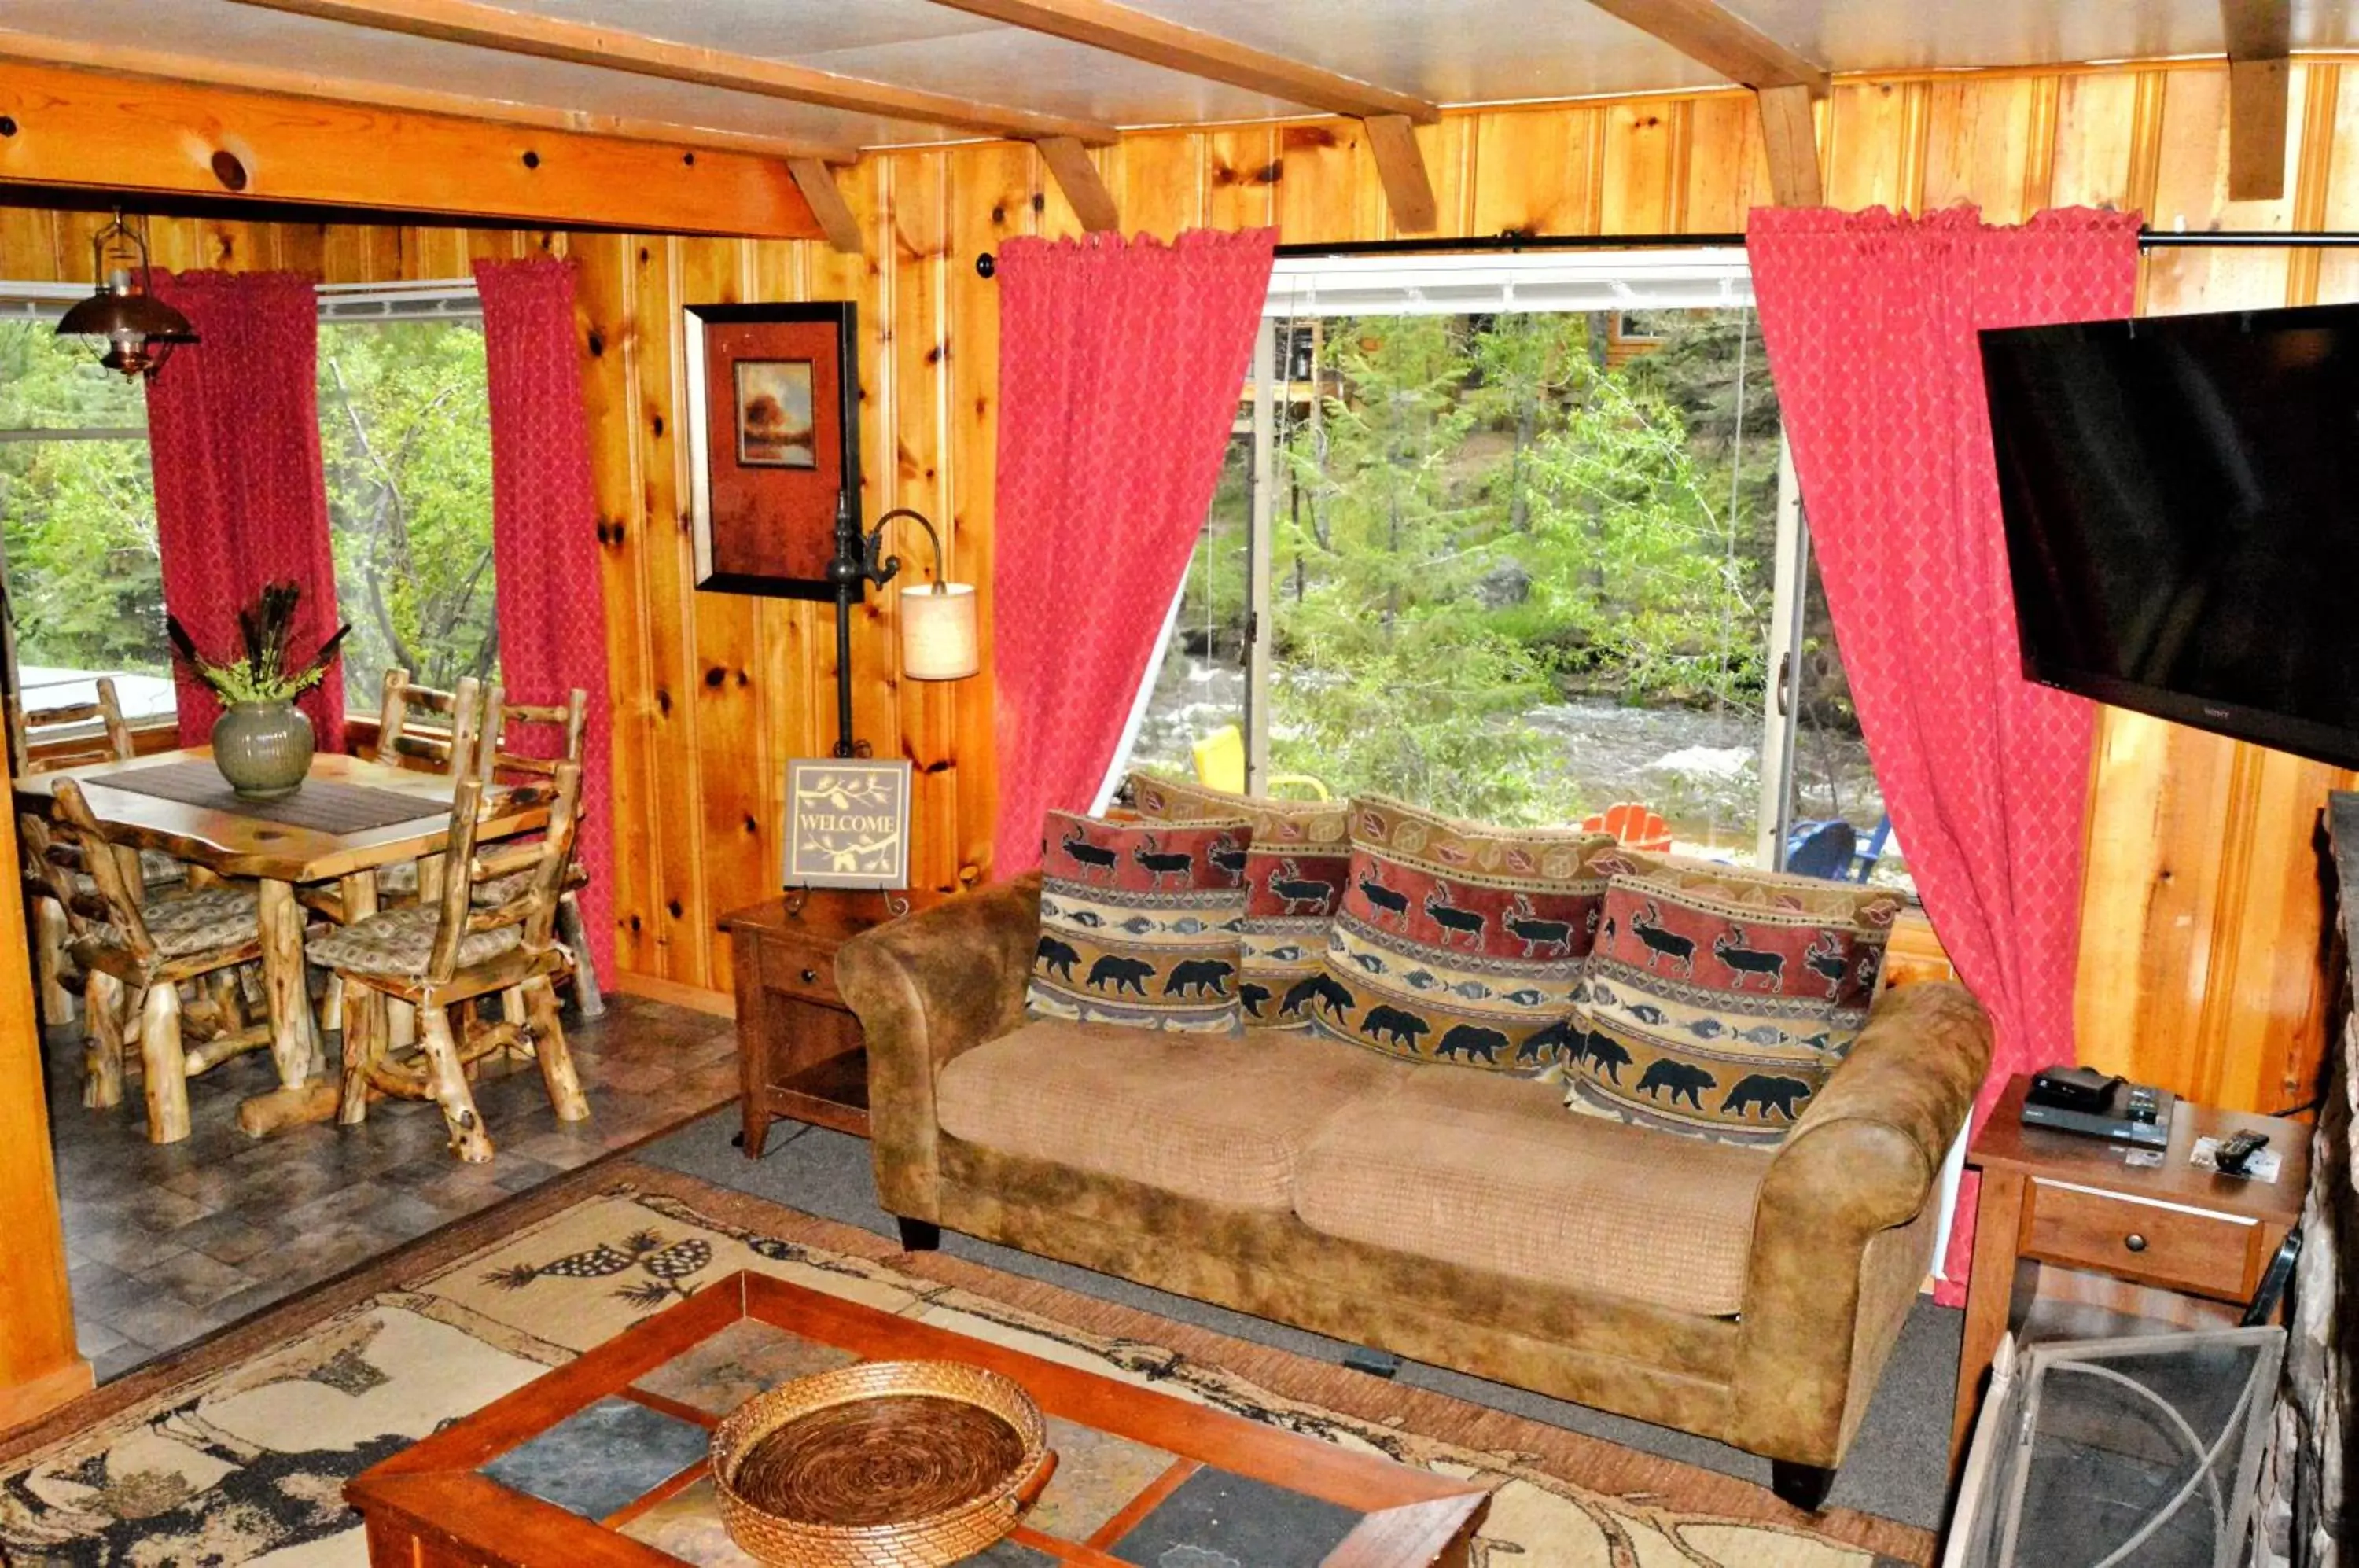 TV and multimedia, Seating Area in The Inn on Fall River & Fall River Cabins